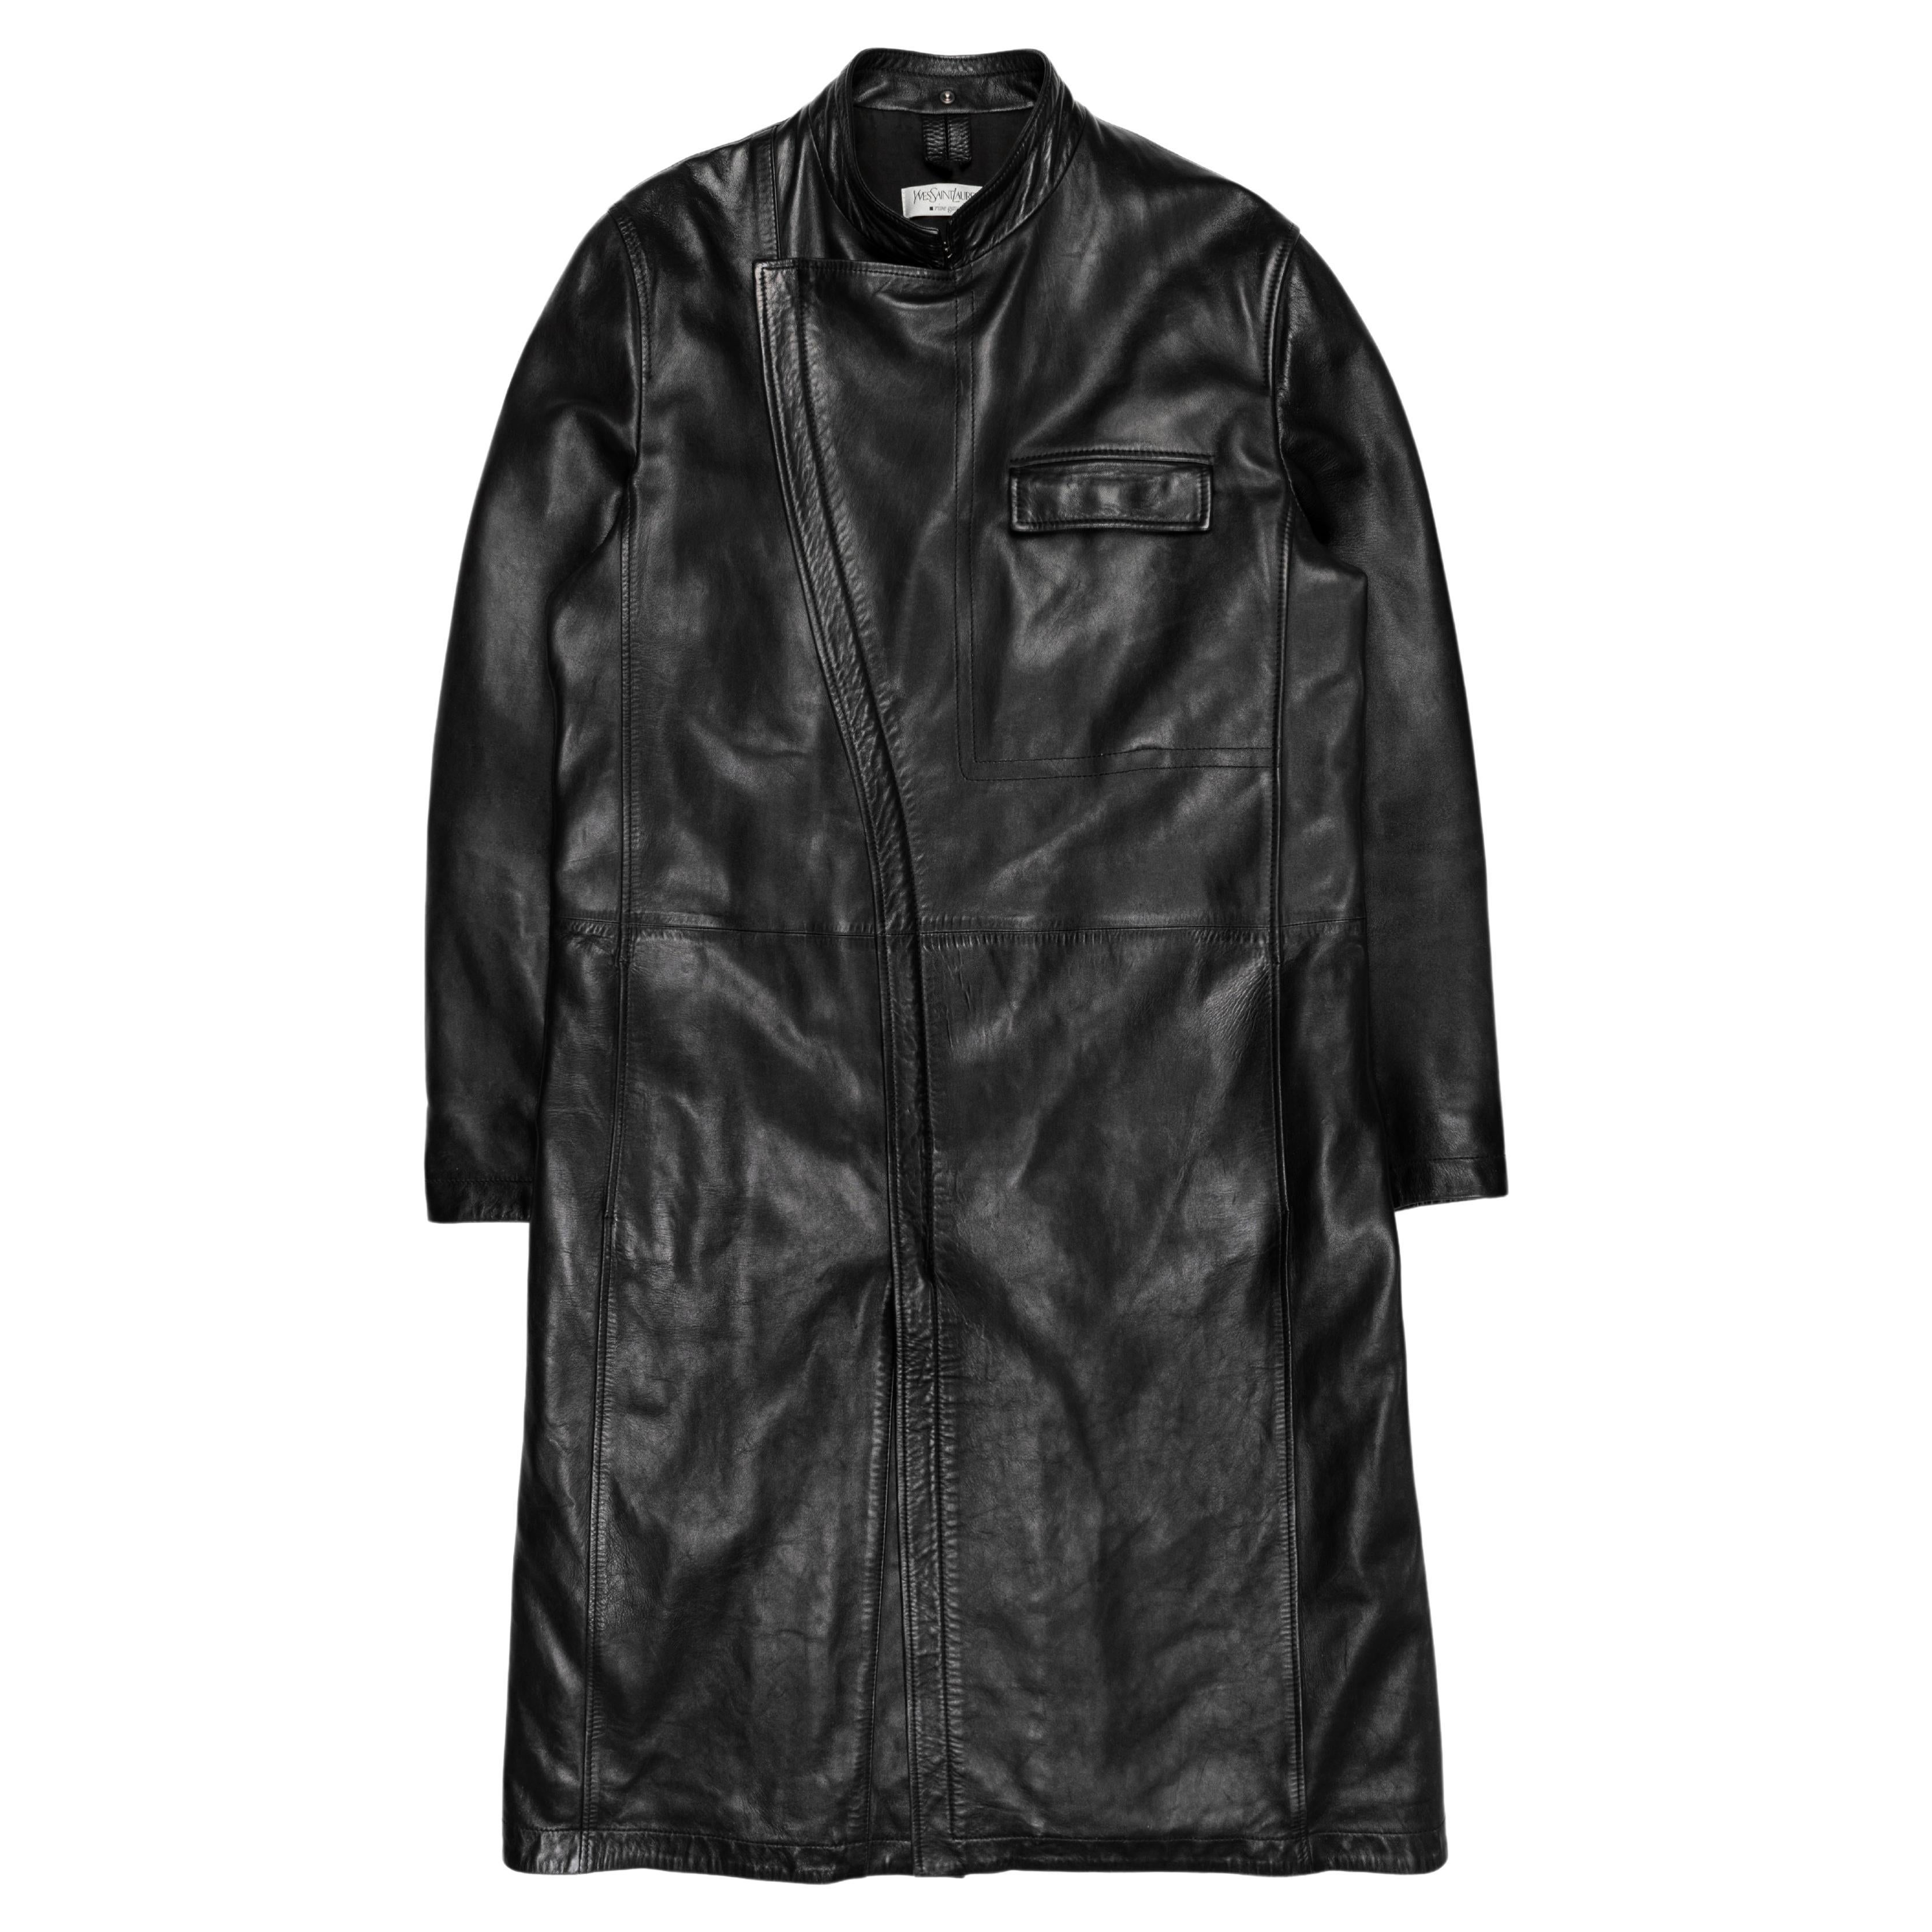 Yves Saint Laurent by Tom Ford Leather Coat